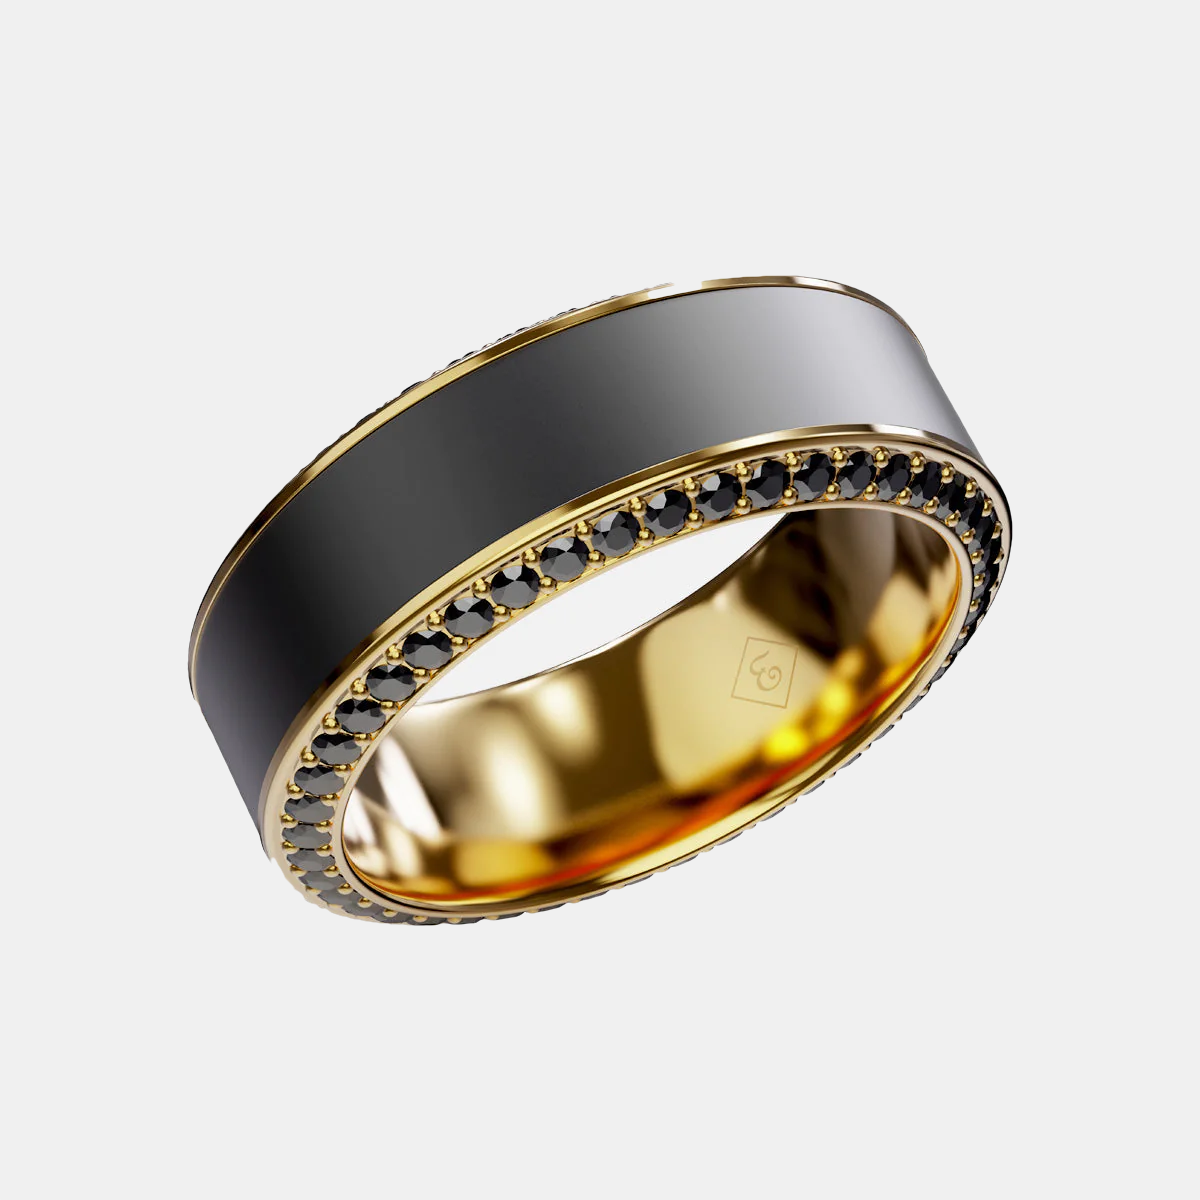 HELIOS  - 8mm - Size 8 - 14K Yellow Gold Band w Black Diamond inlay and Diamond Insets Polished Finish - SHIPS WITHIN 2 BUSINESS DAYS